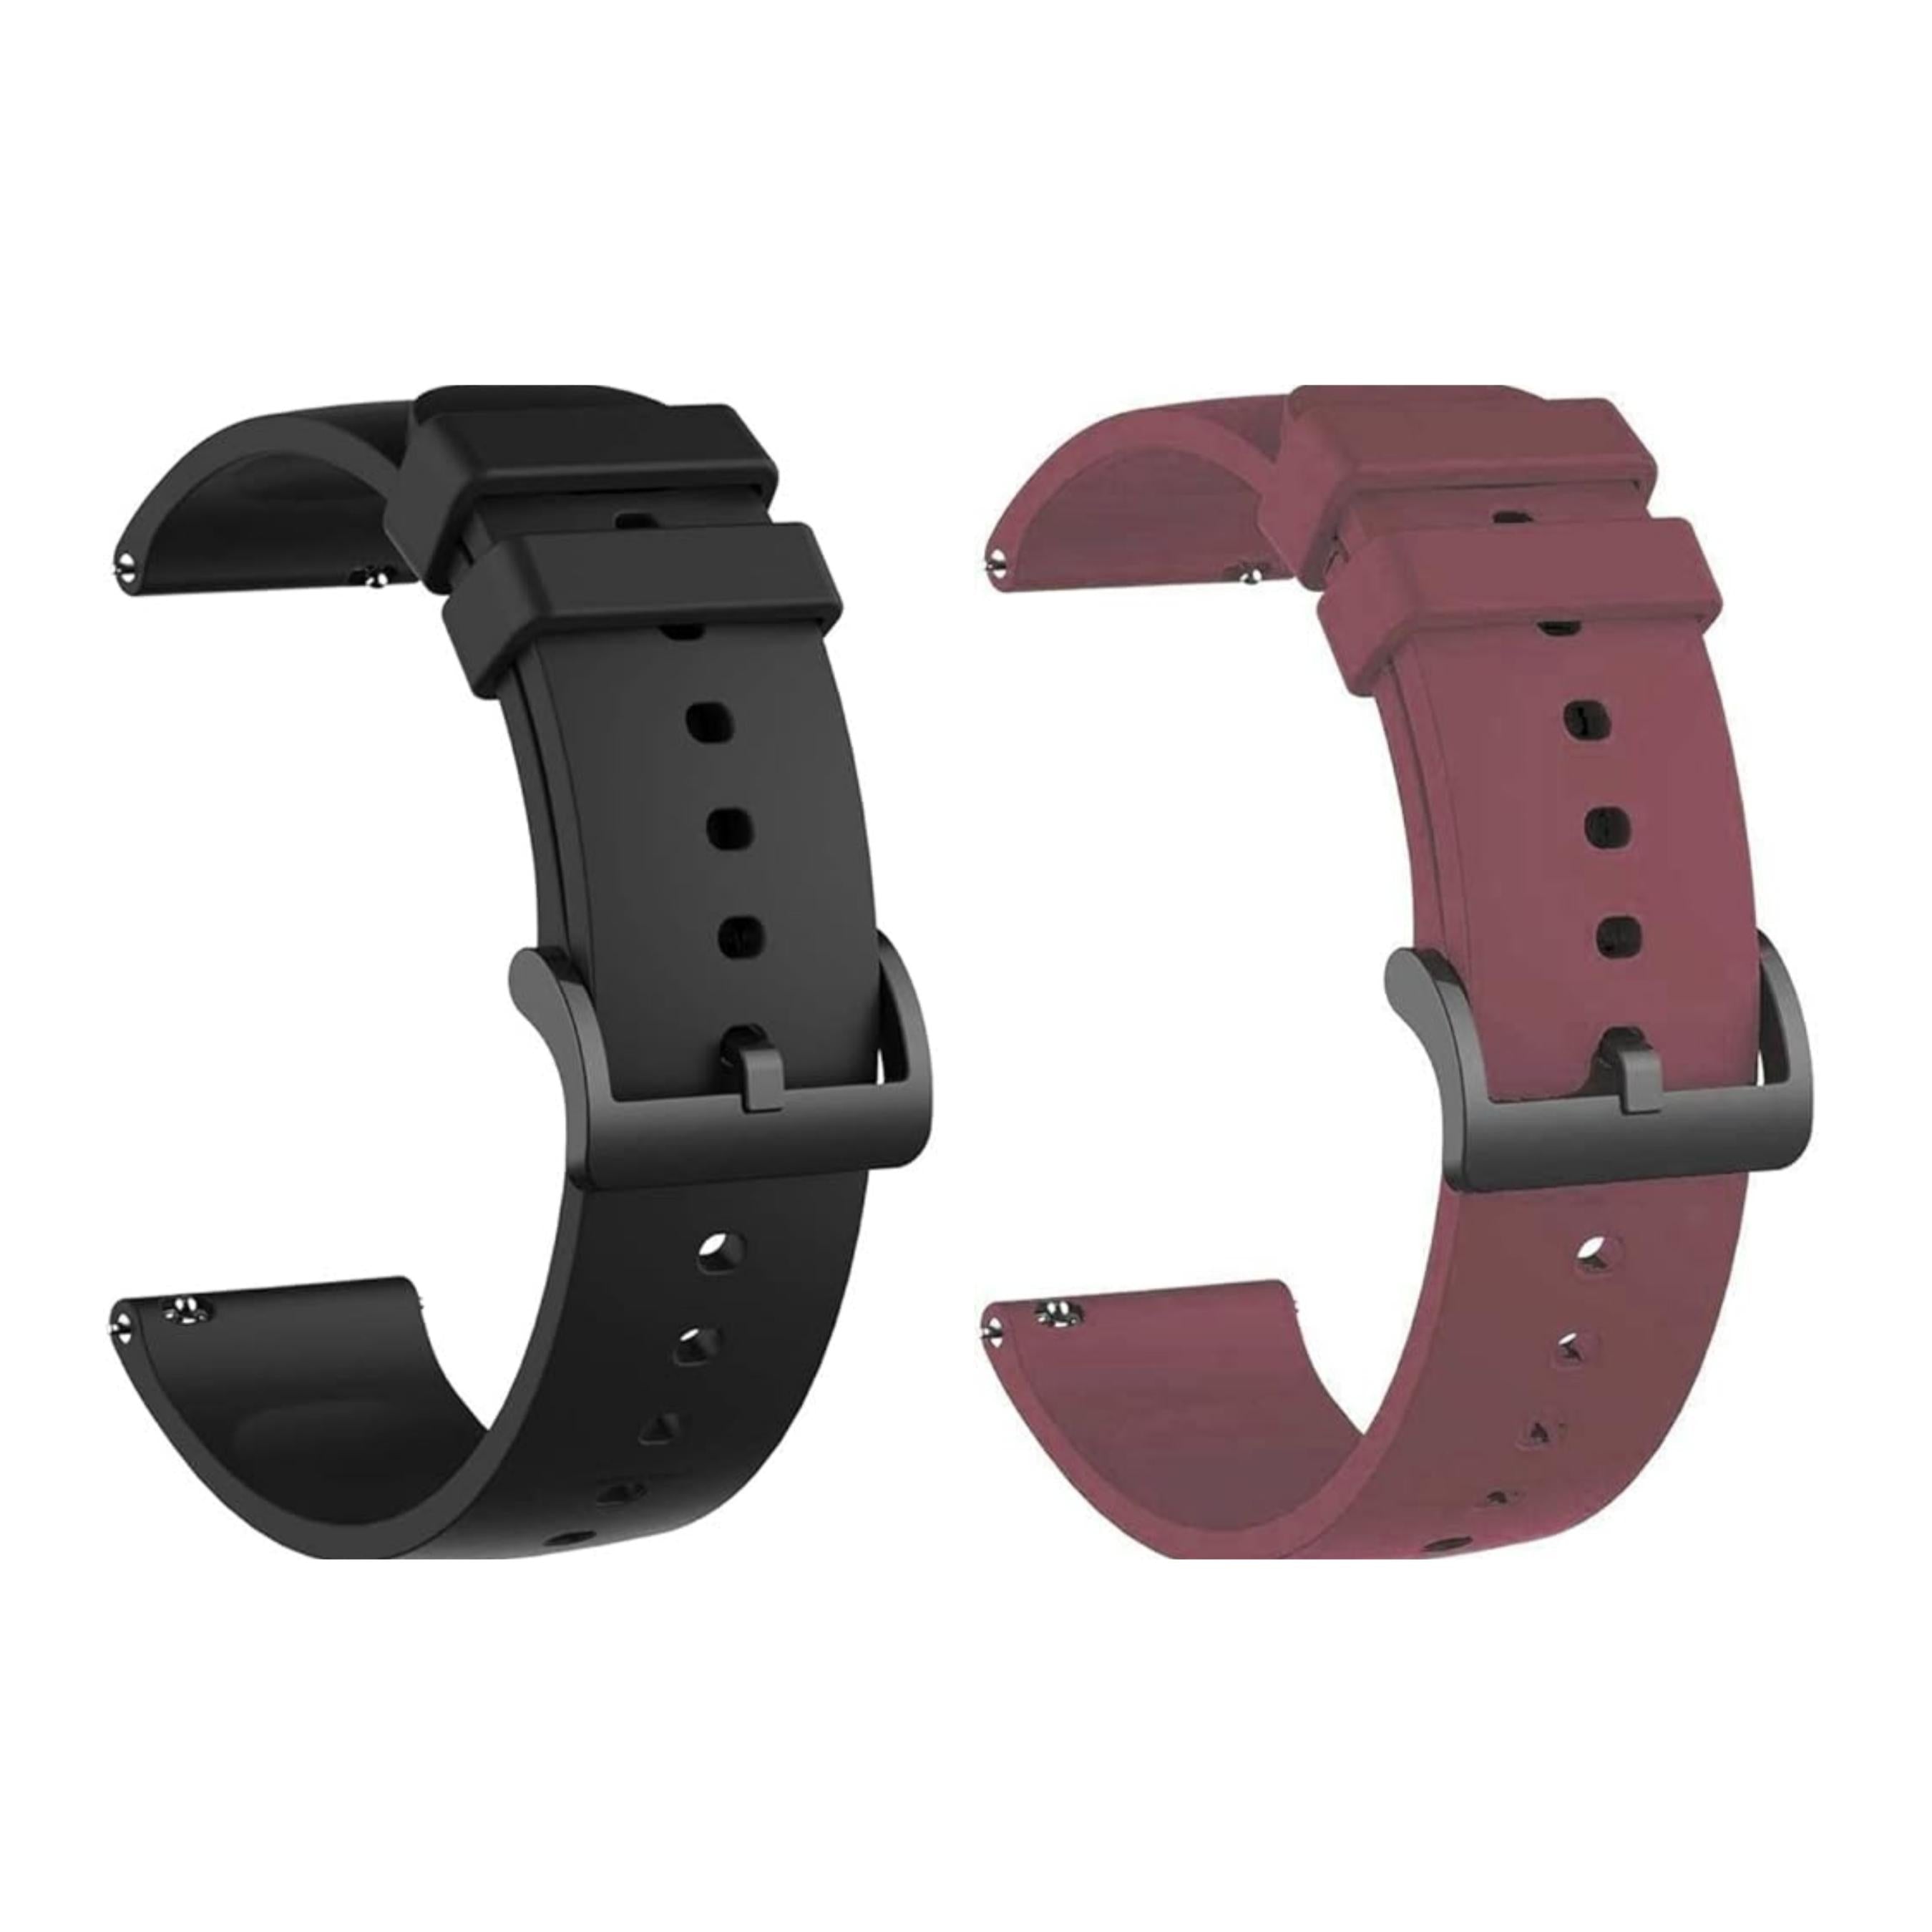 Lorenz Silicone 22MM Replacement Watch Strap With Buckle Lock Compatible with Boat Xtend, Boat Xtend Pro, Noise Colorfit Pulse 2 Max, Noise Pulse Go Buzz, Fireboltt Phoenix & all other Watches (Black,Maroon)